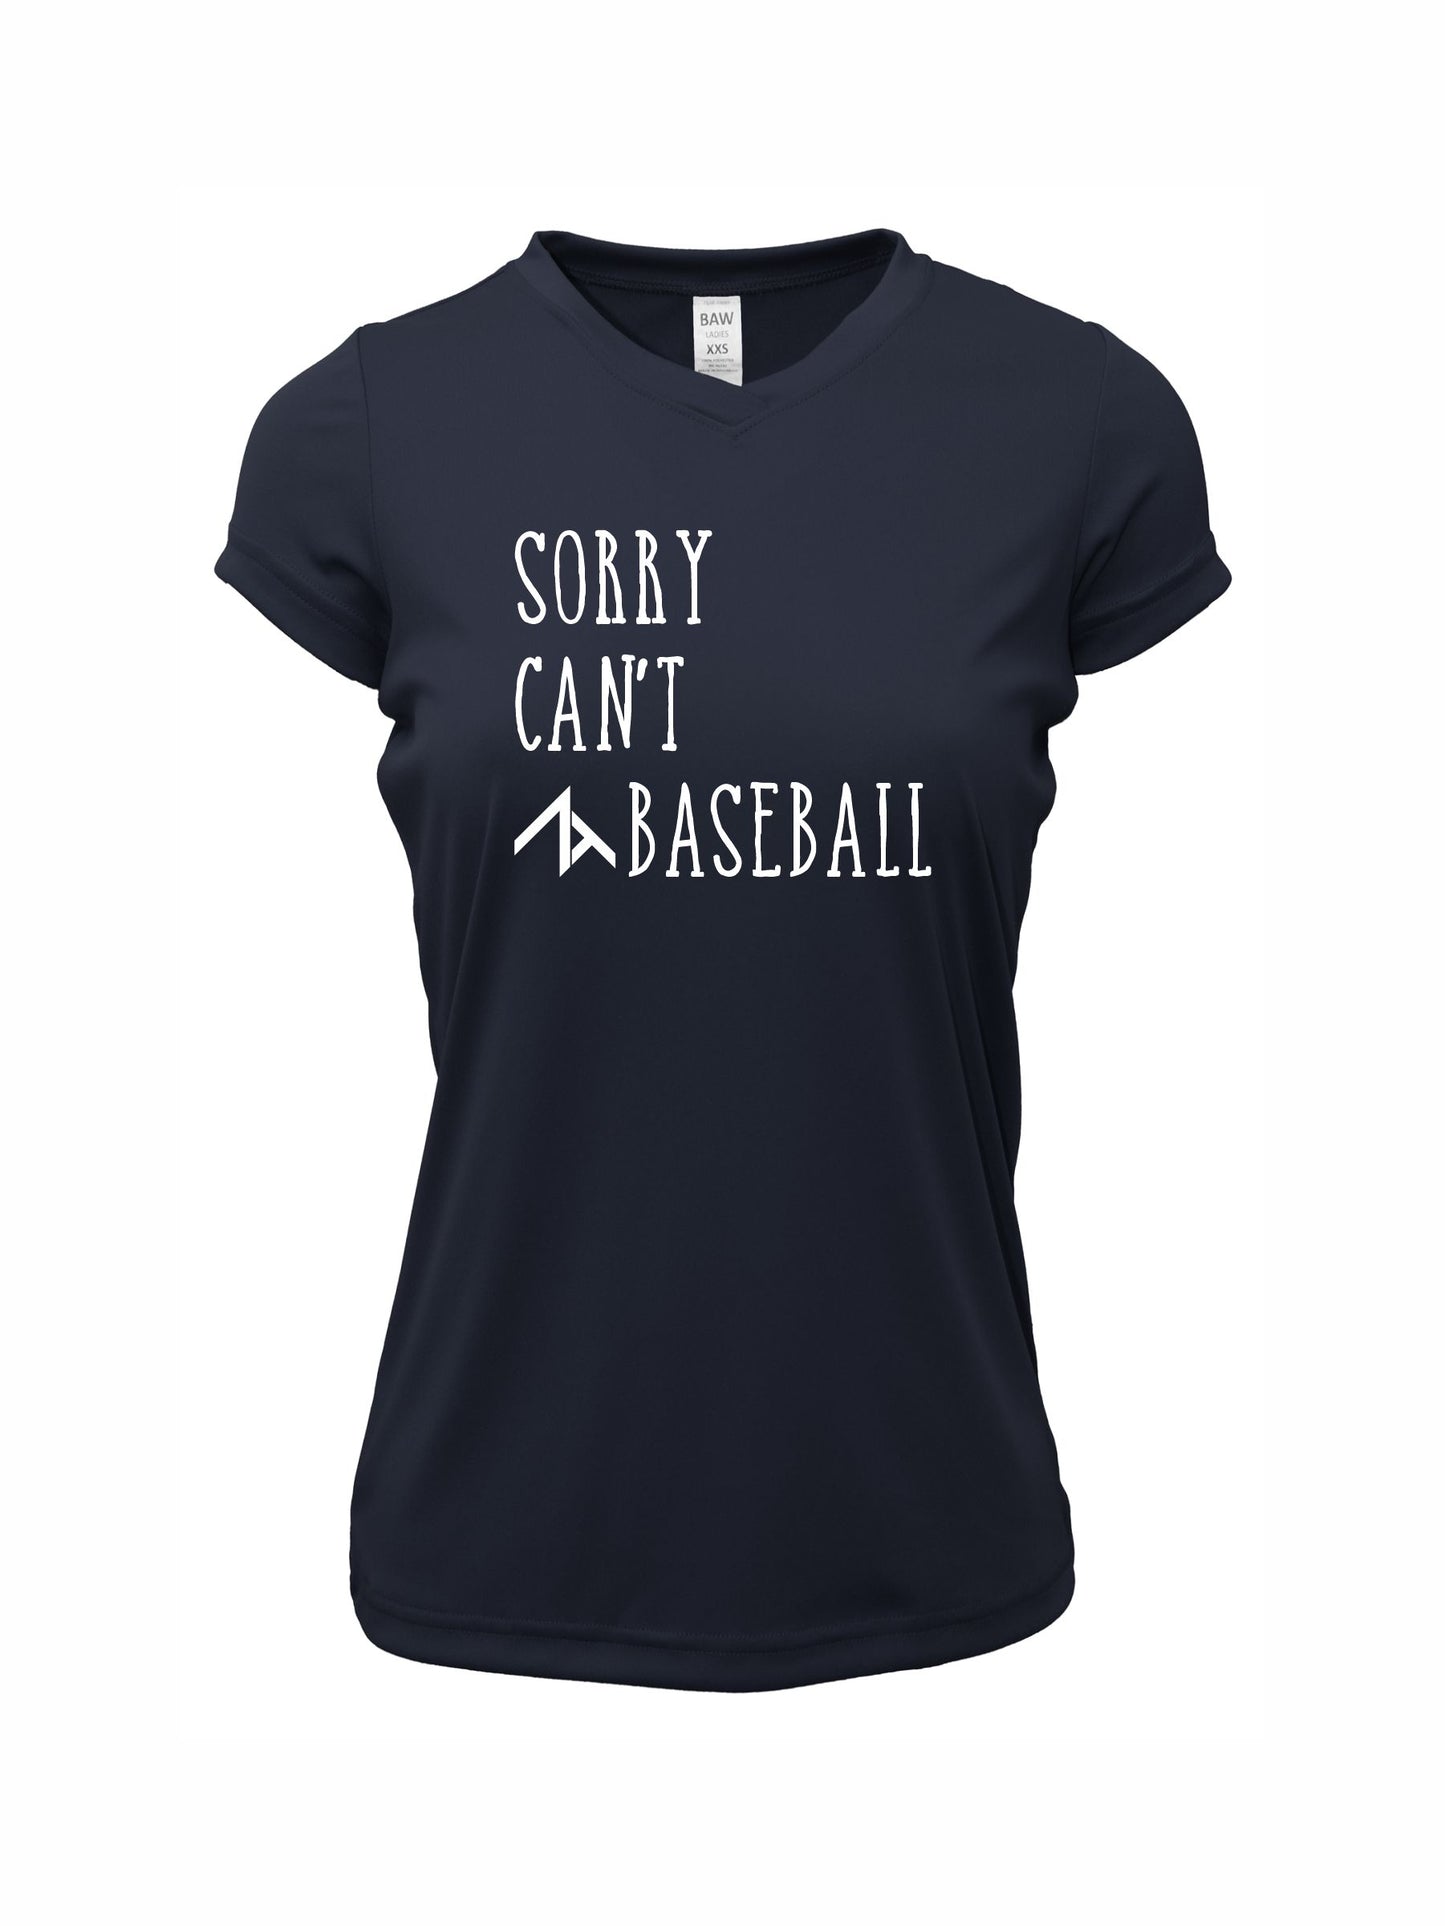 V-Neck Short Sleeve "SORRY CAN'T" Dri-Fit T-shirt